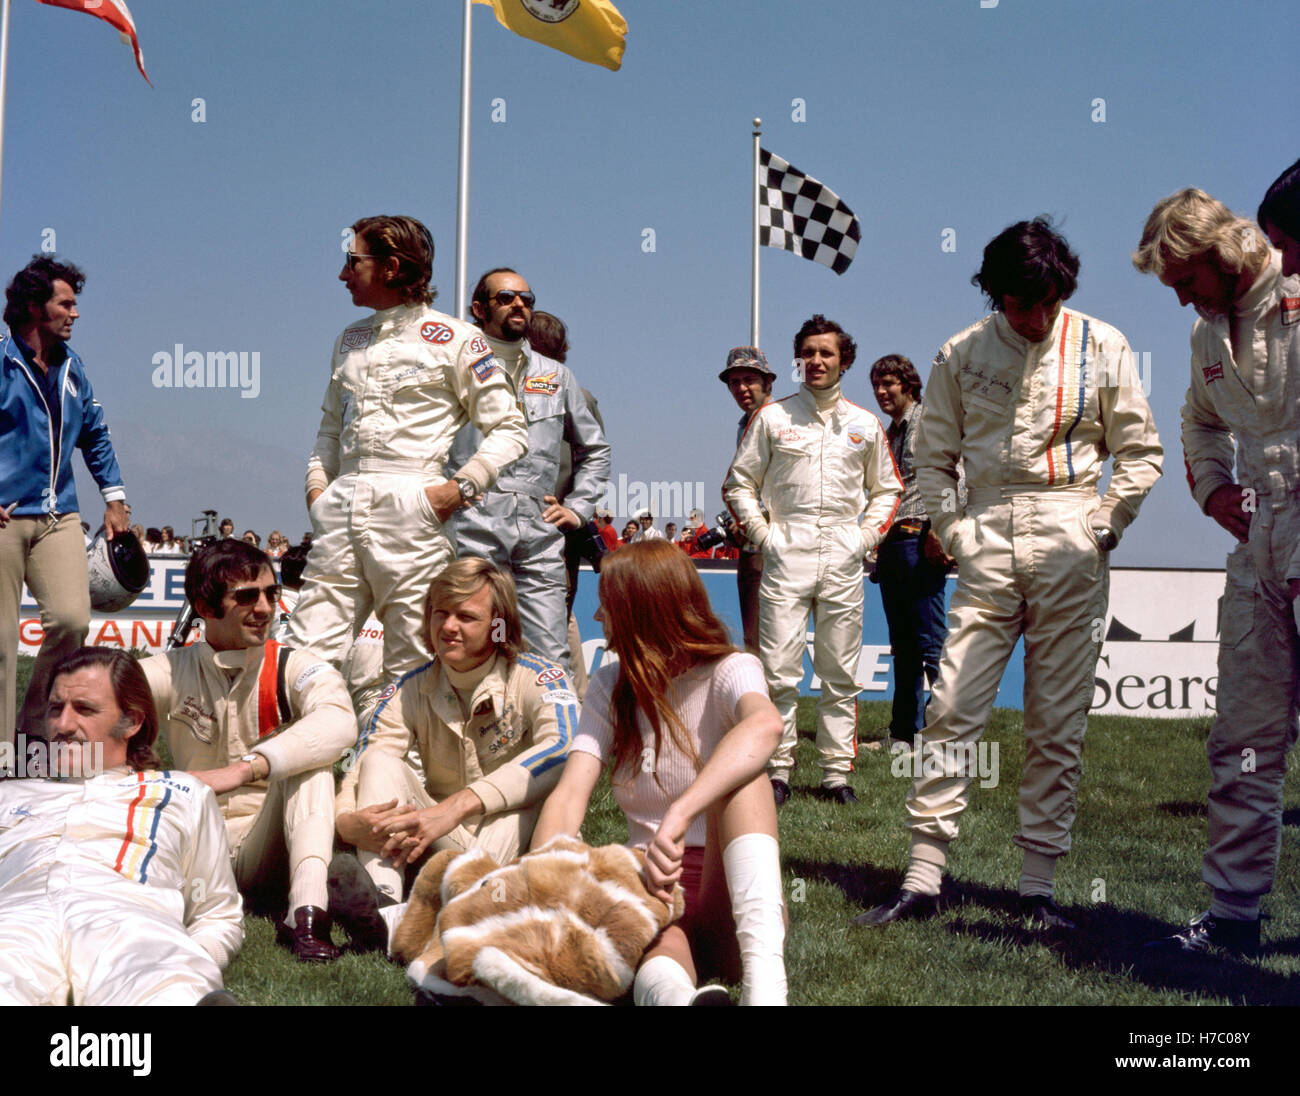 Graham Hill, Jo Siffert, Ronnie Peterson, Henri Pescarolo, Jacky Ickx and a girl at the Questor Grand Prix at the Ontario Motor Speedway in California, USA, on 28 March 1971. 